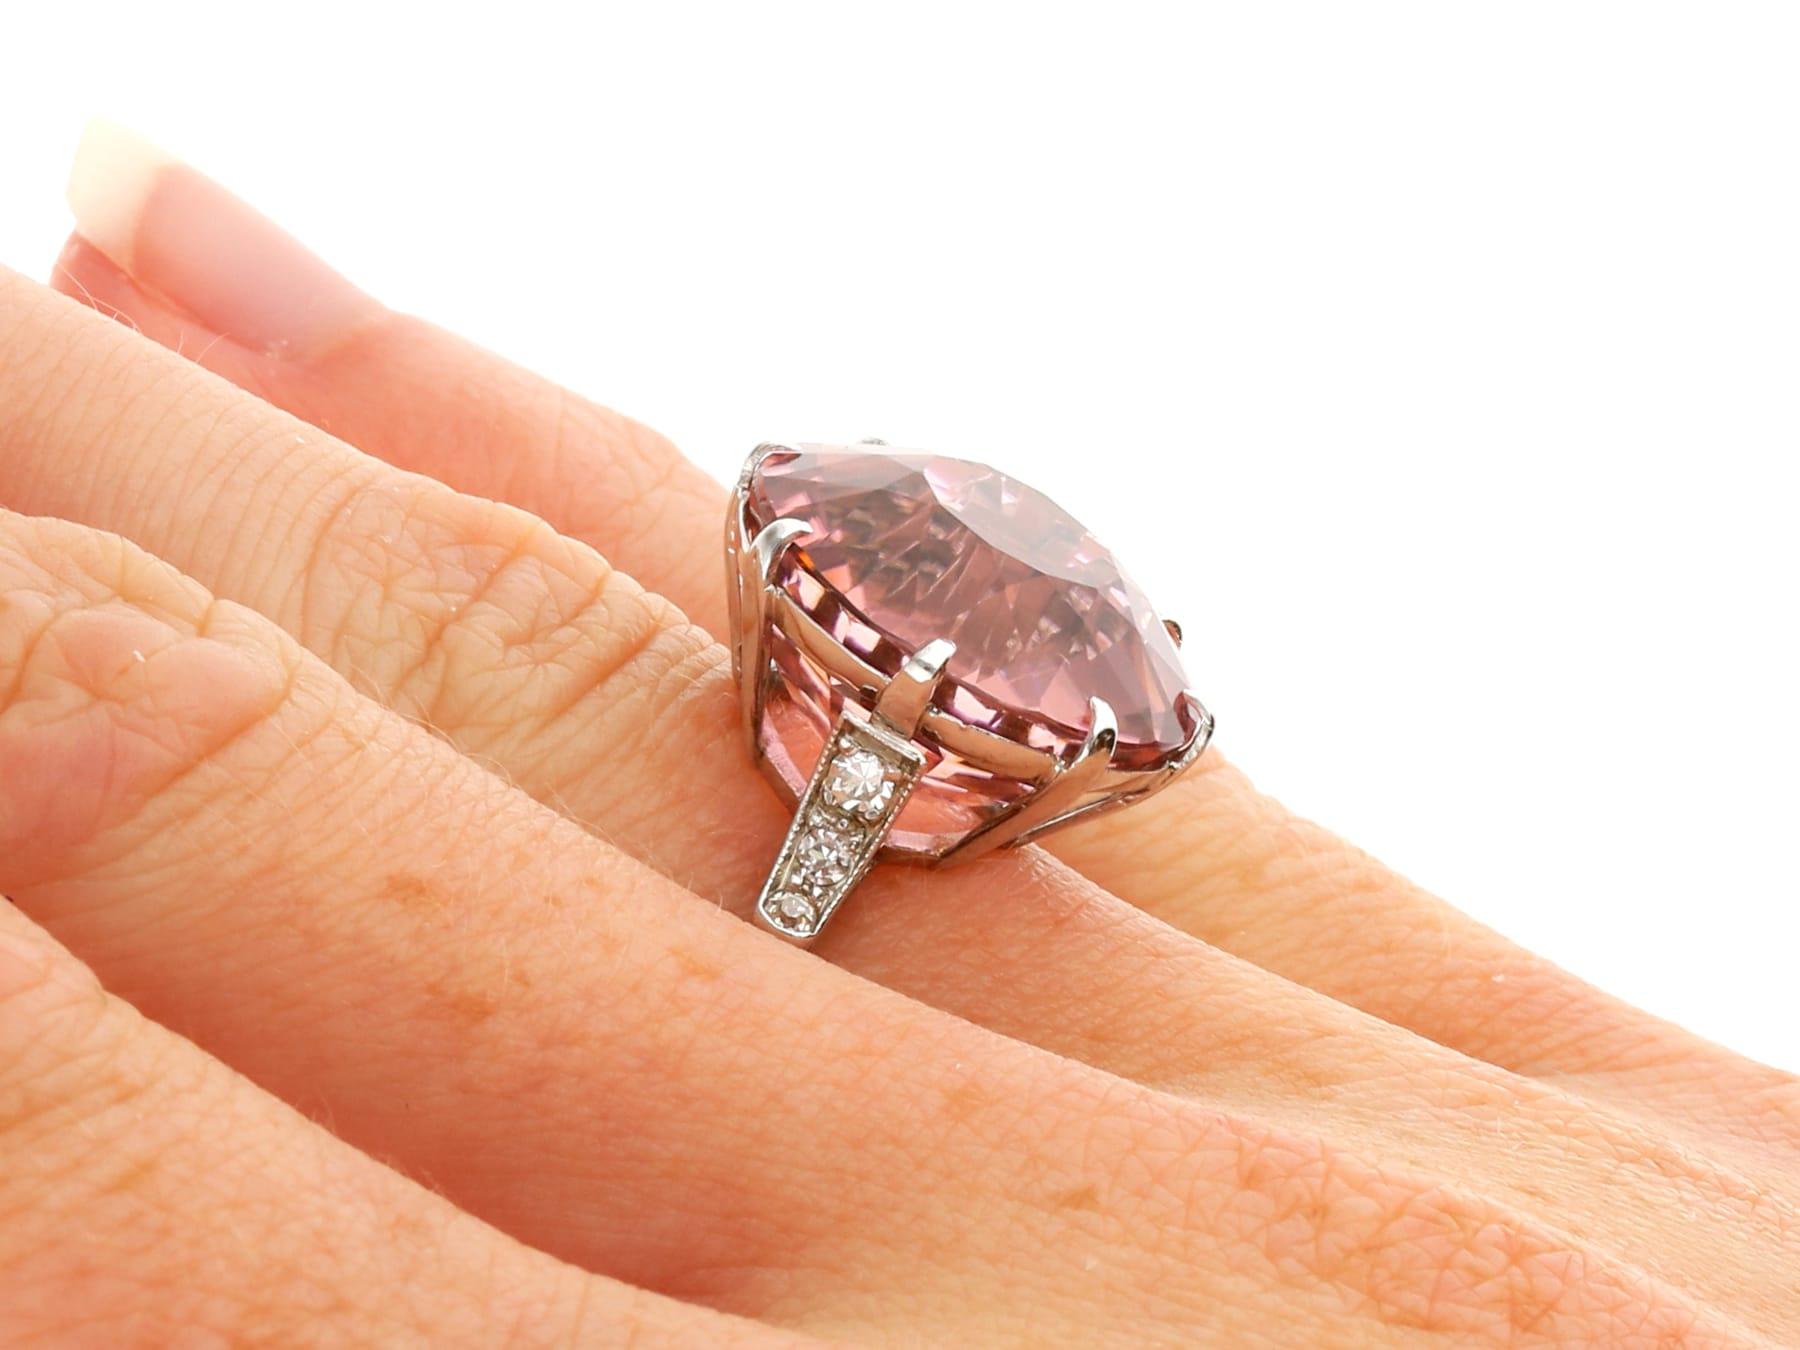 Antique 16.41Ct Pink Tourmaline and 0.12Ct Diamond 18K White Gold Dress Ring For Sale 3